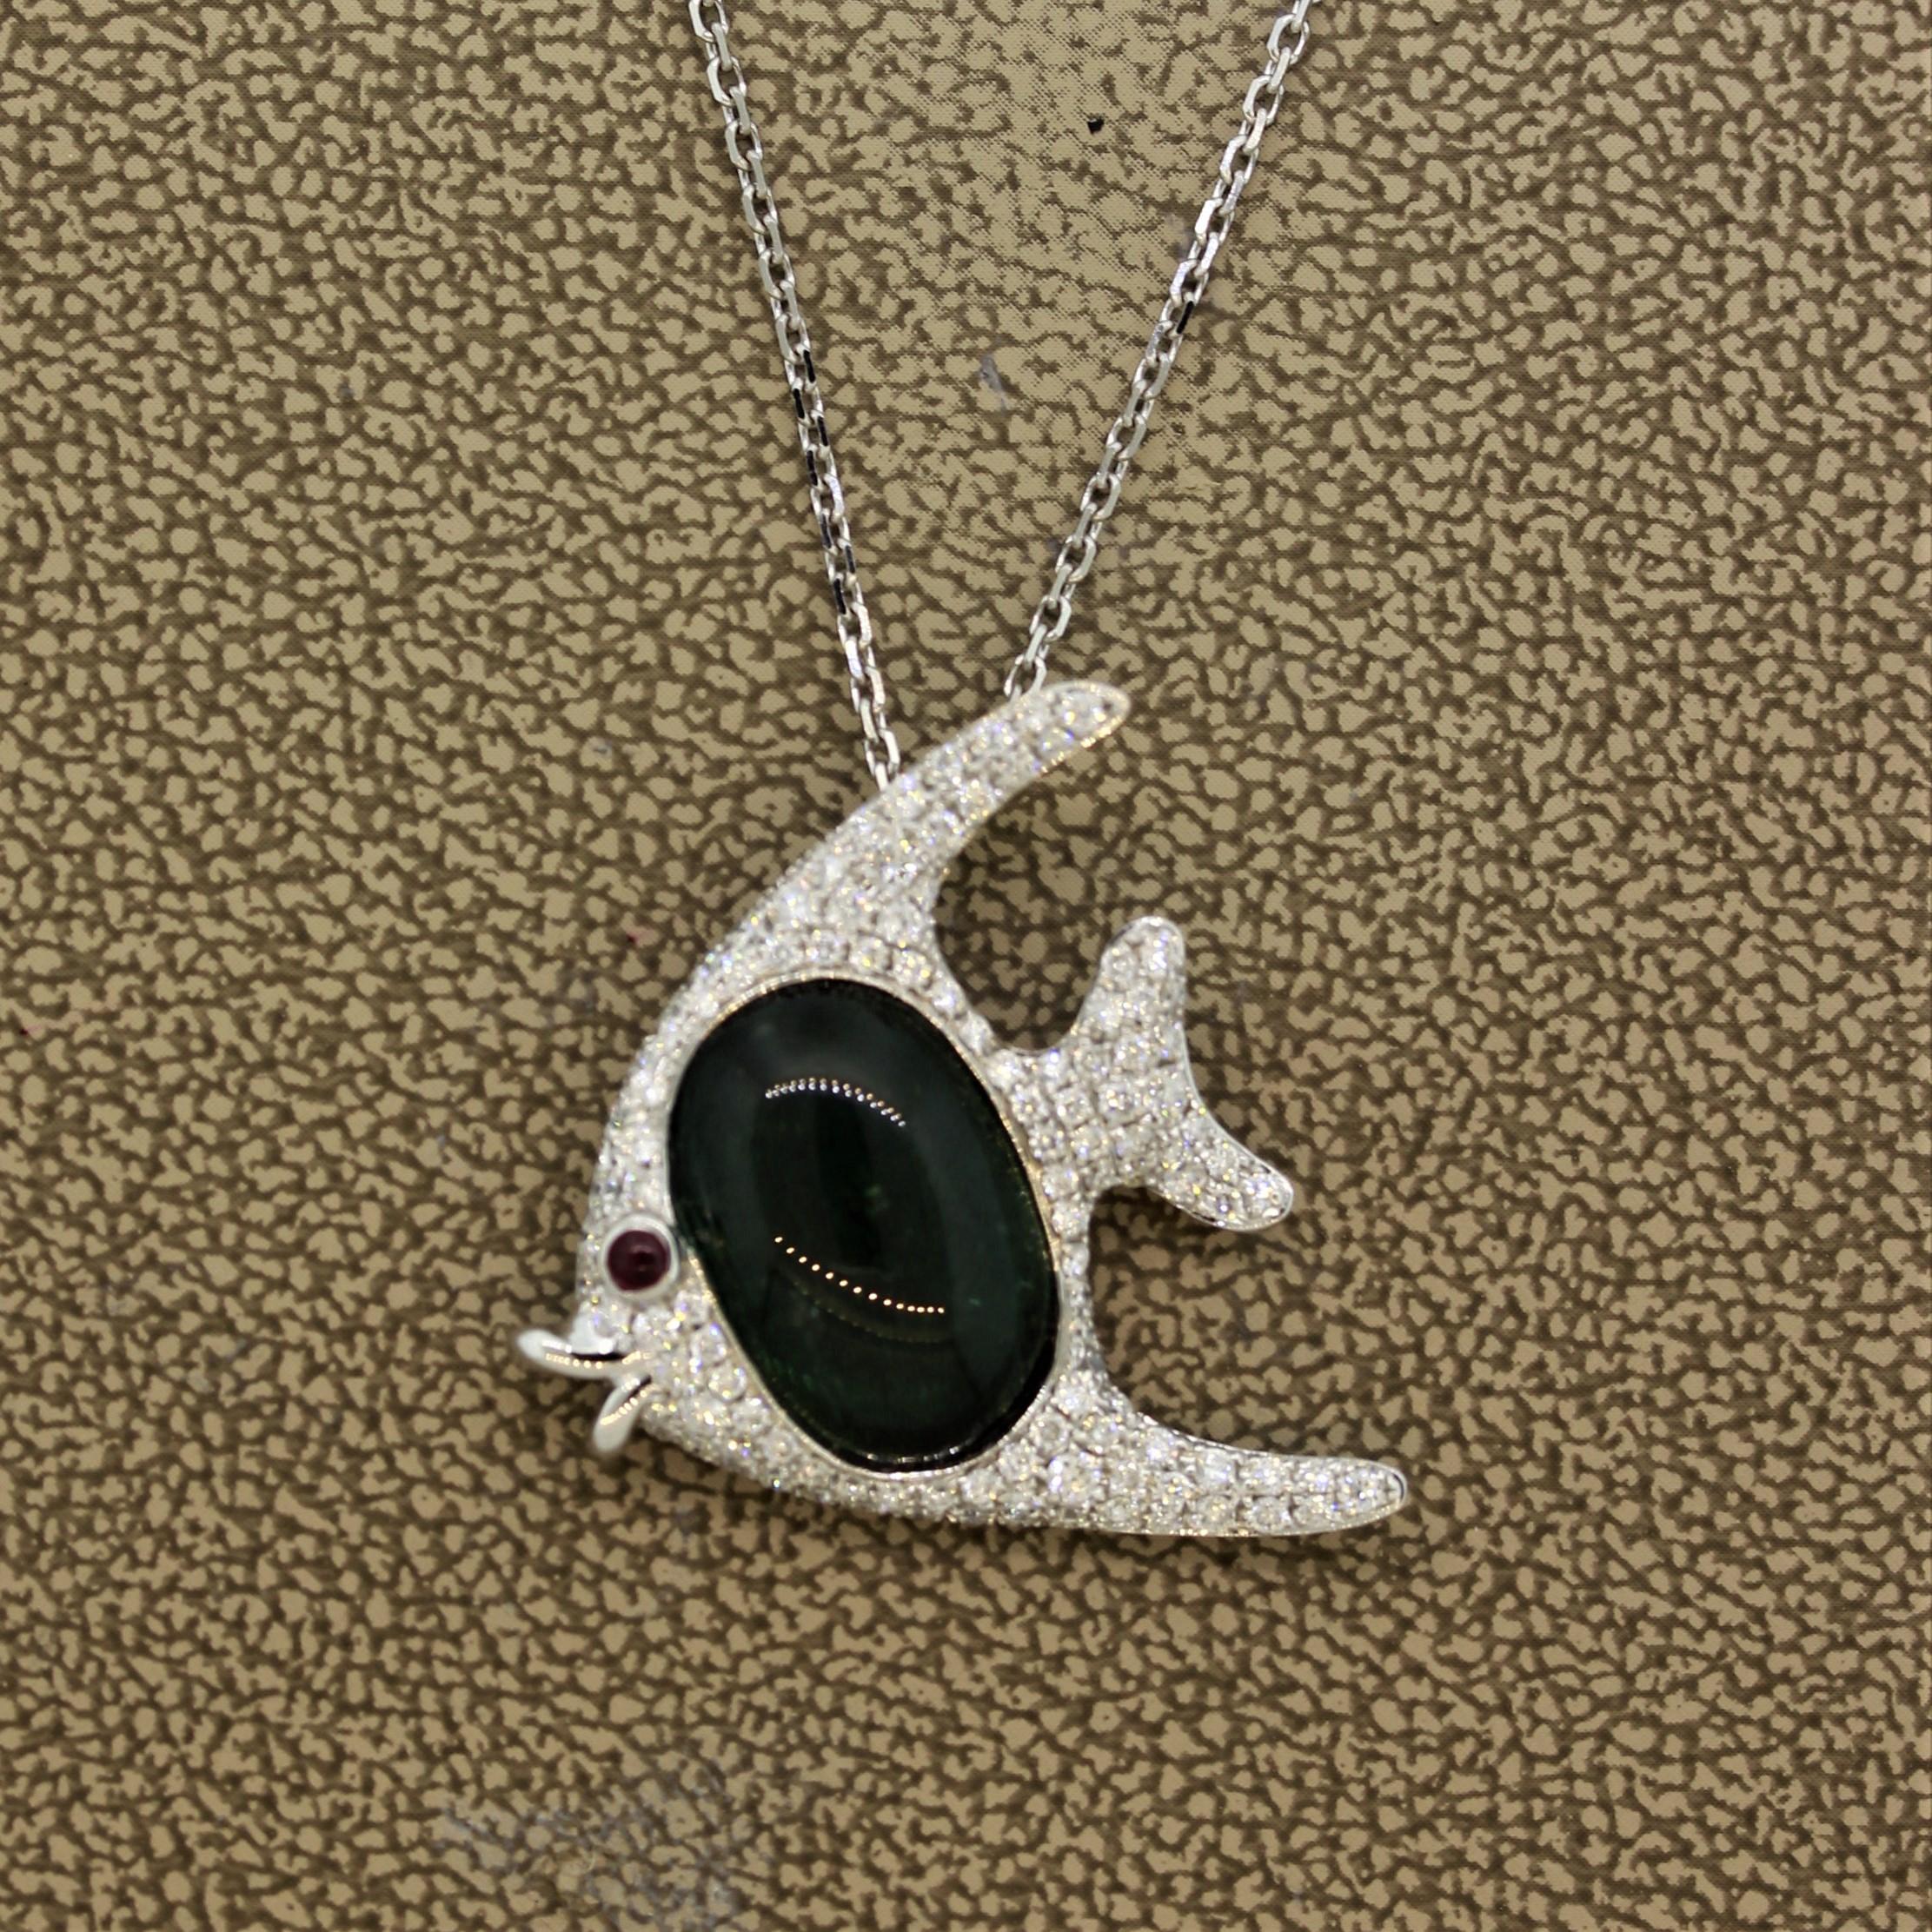 A sweet swimming fish! It features 0.85 carats of round brilliant cut diamonds set around the fish with an 8.14 carat green tourmaline set in the middle. It is finished with 1 cabochon ruby as its eye. Made in 18k white gold and ready to swim